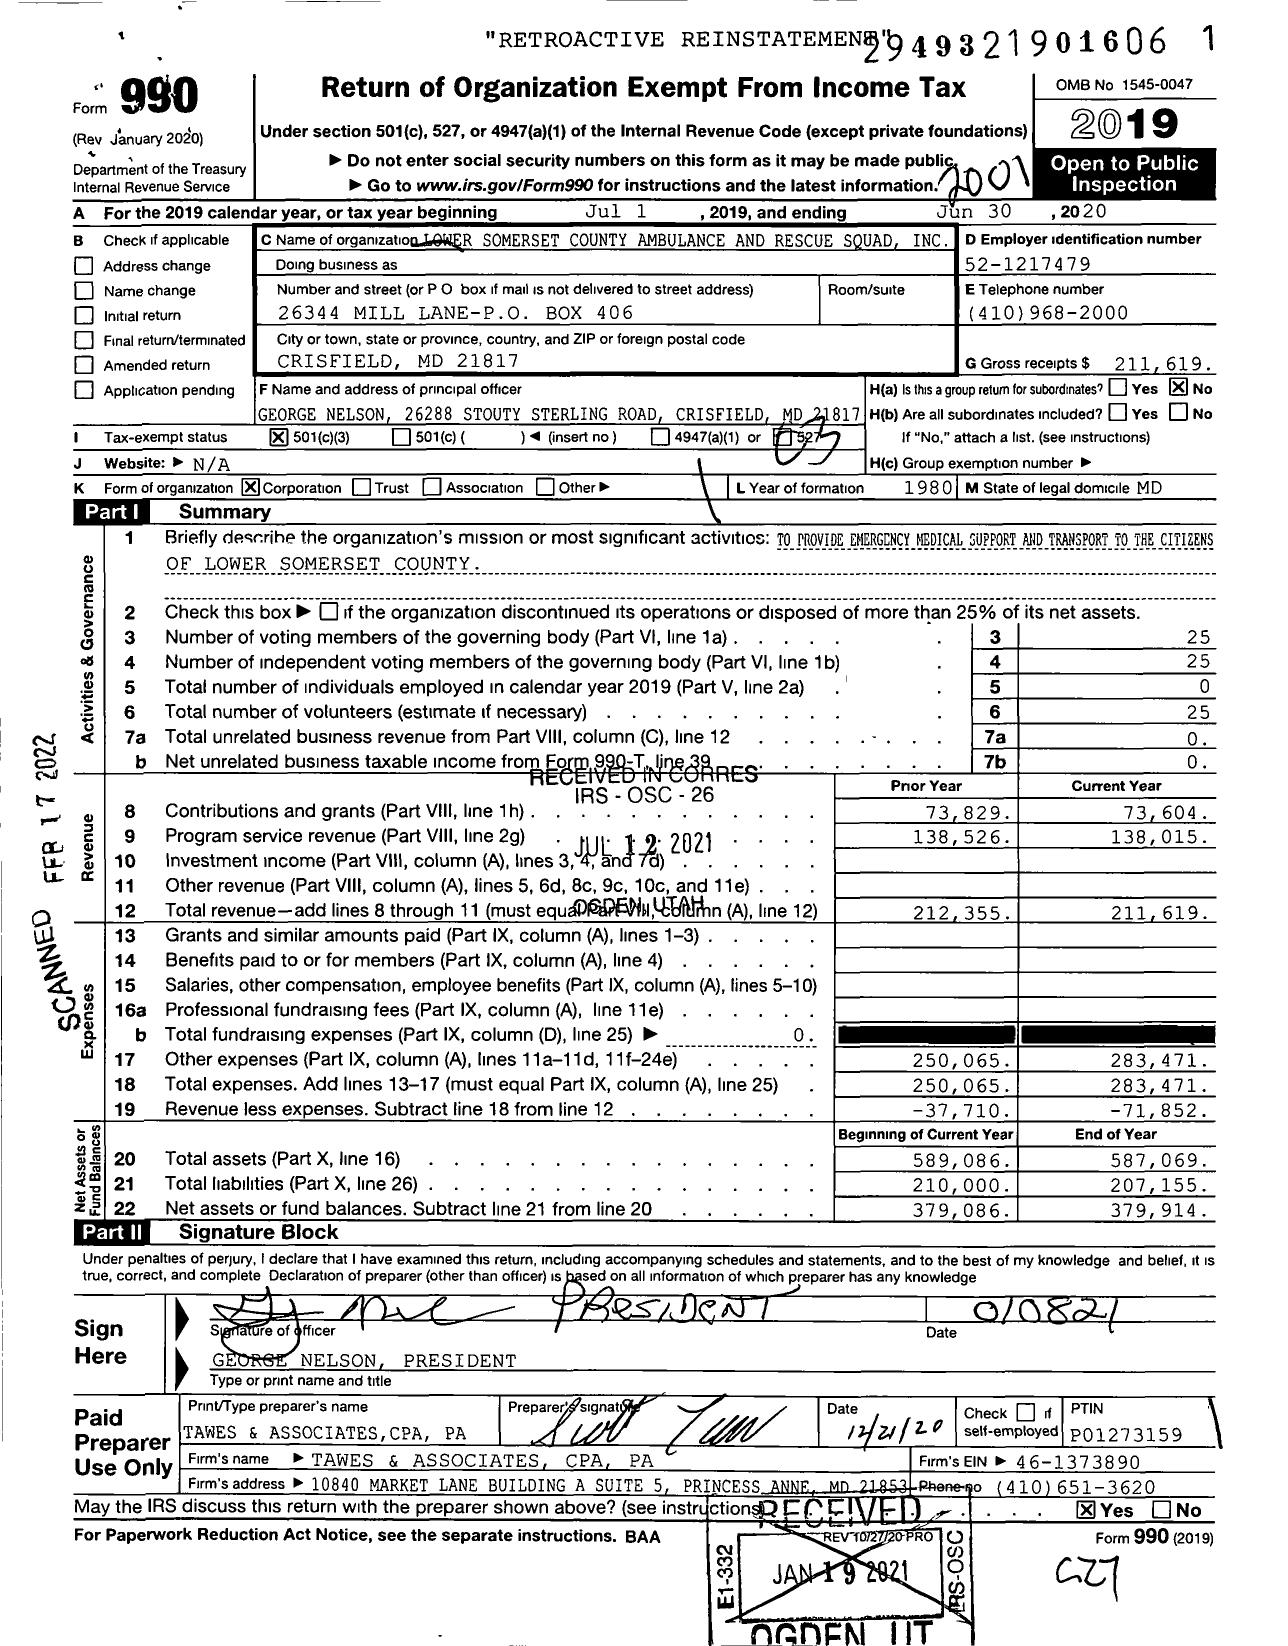 Image of first page of 2019 Form 990 for Lower Somerset County Ambulance and Rescue Squad